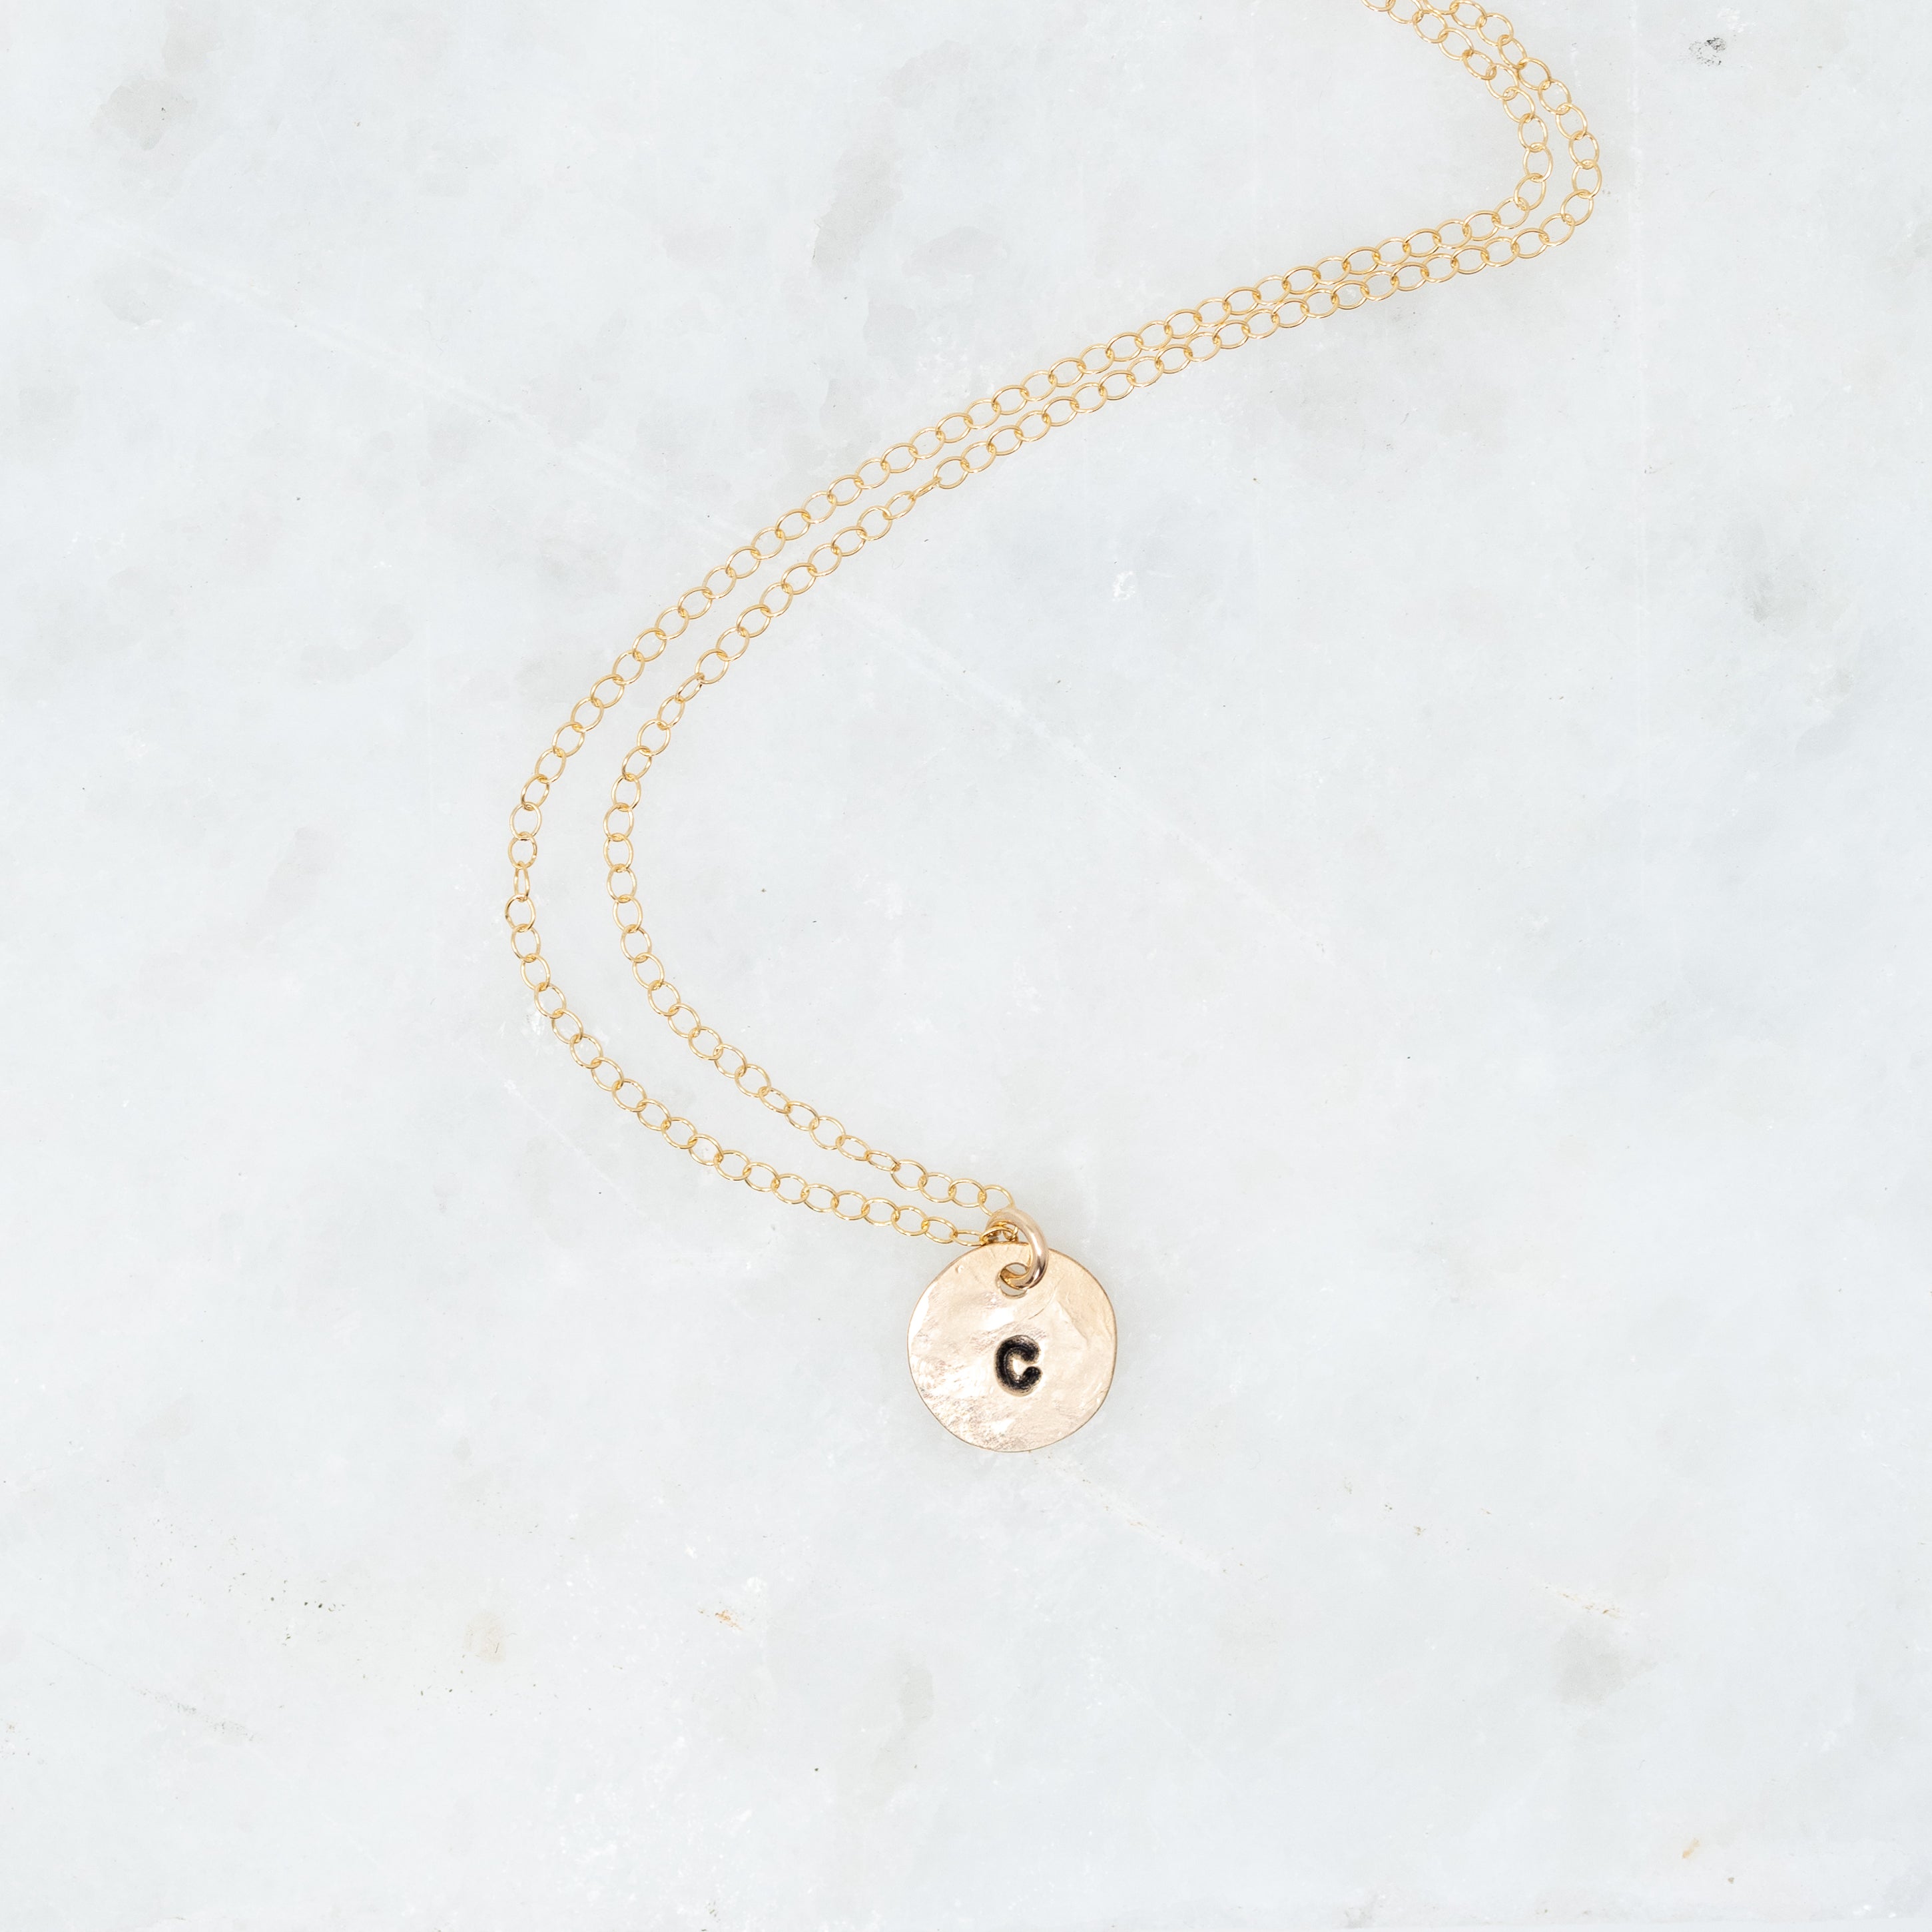 Custom Hand-Stamped Tiny Initial Necklace